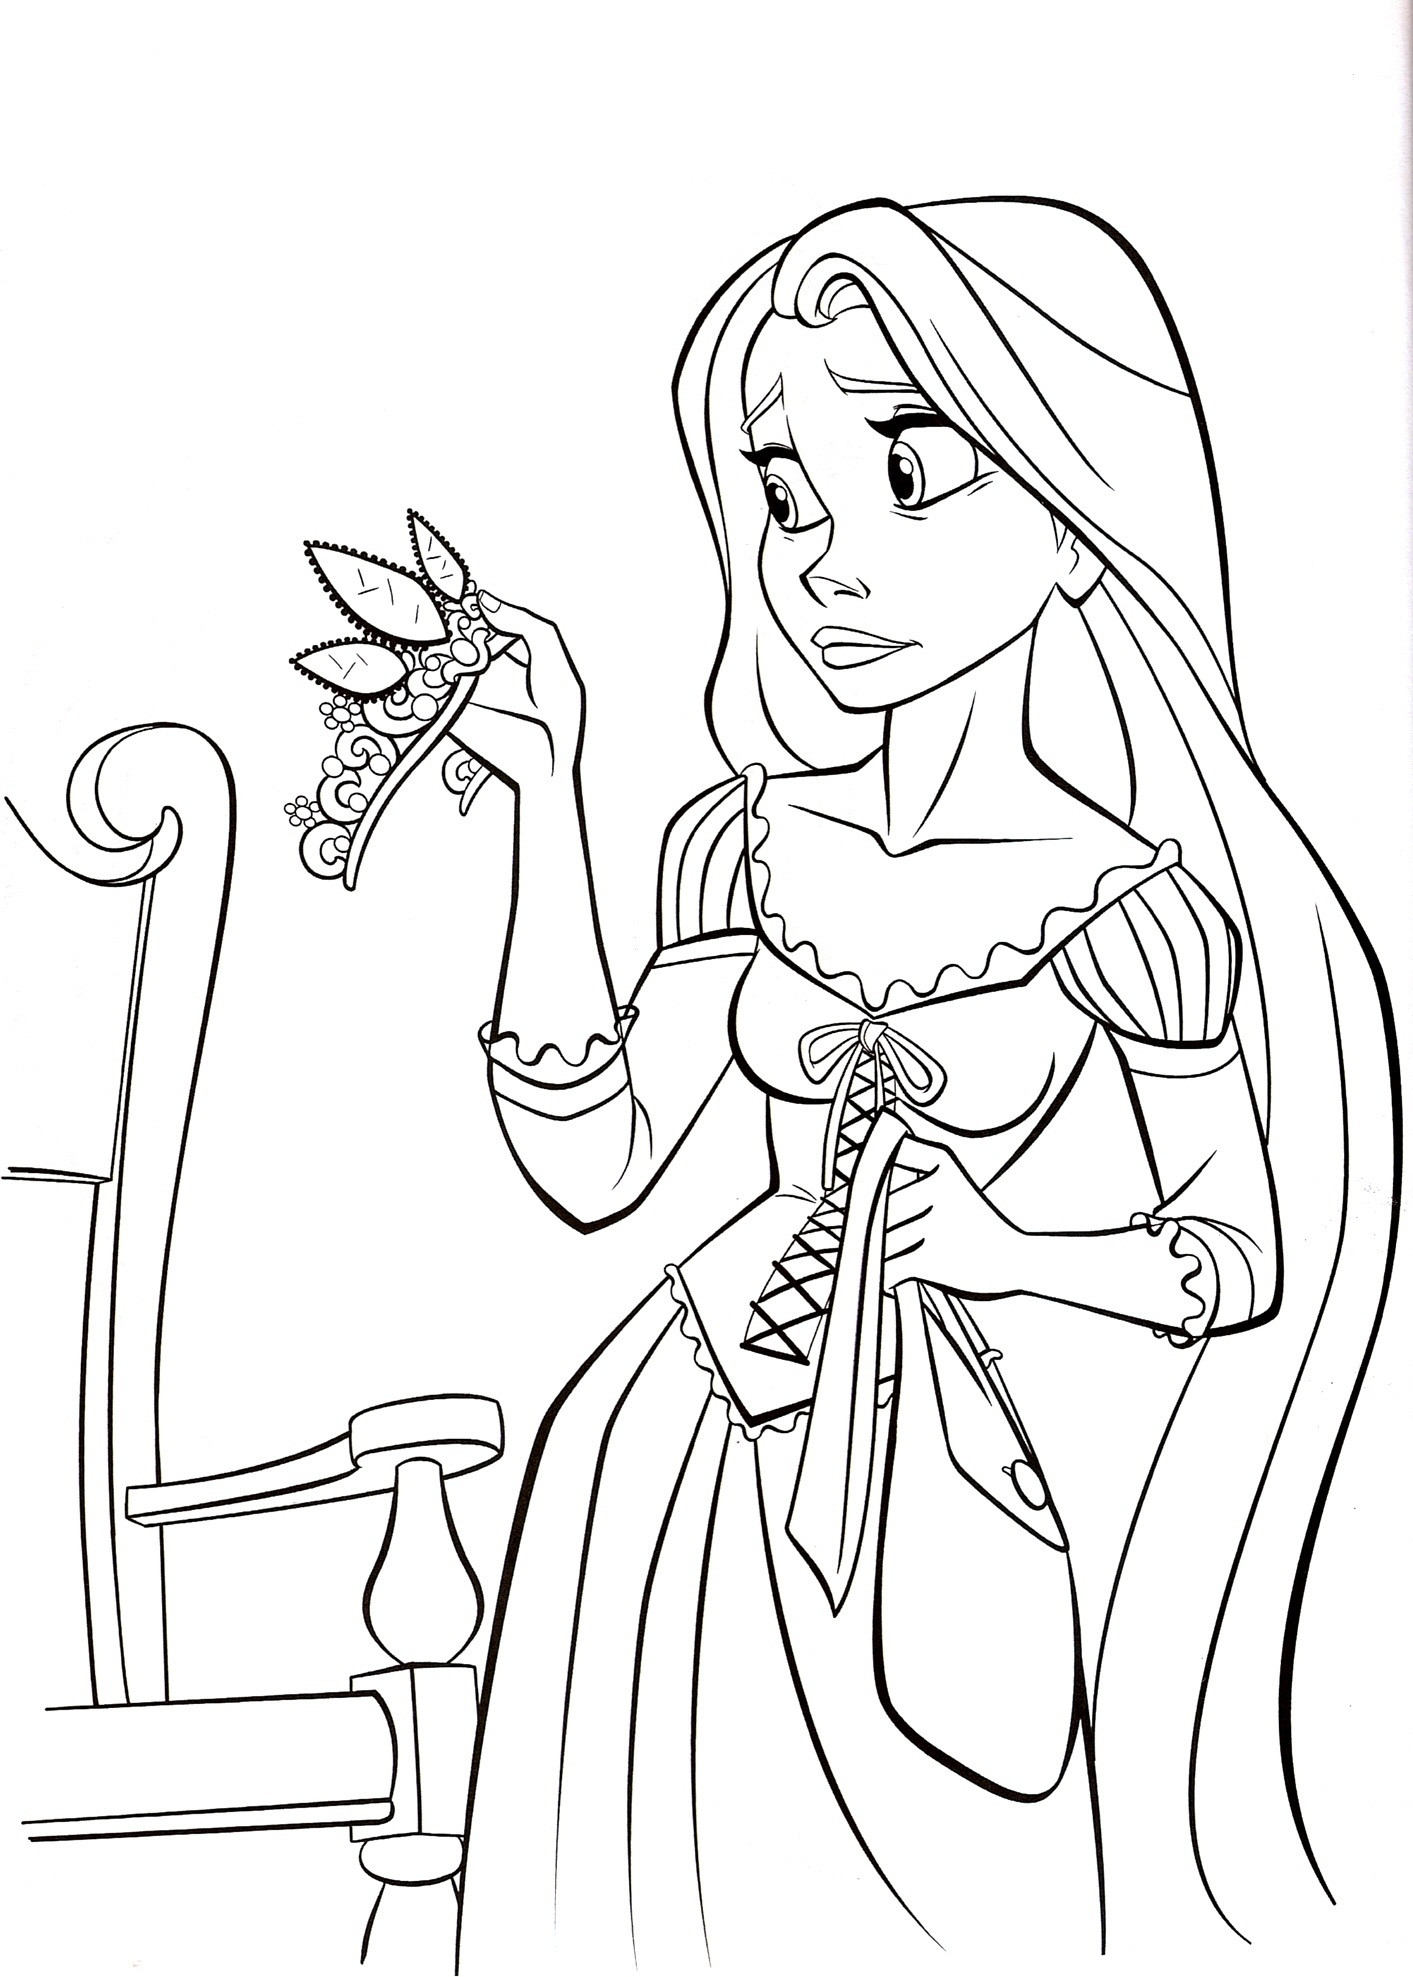 Disney Coloring Pages For Kids
 Free Printable Tangled Coloring Pages For Kids